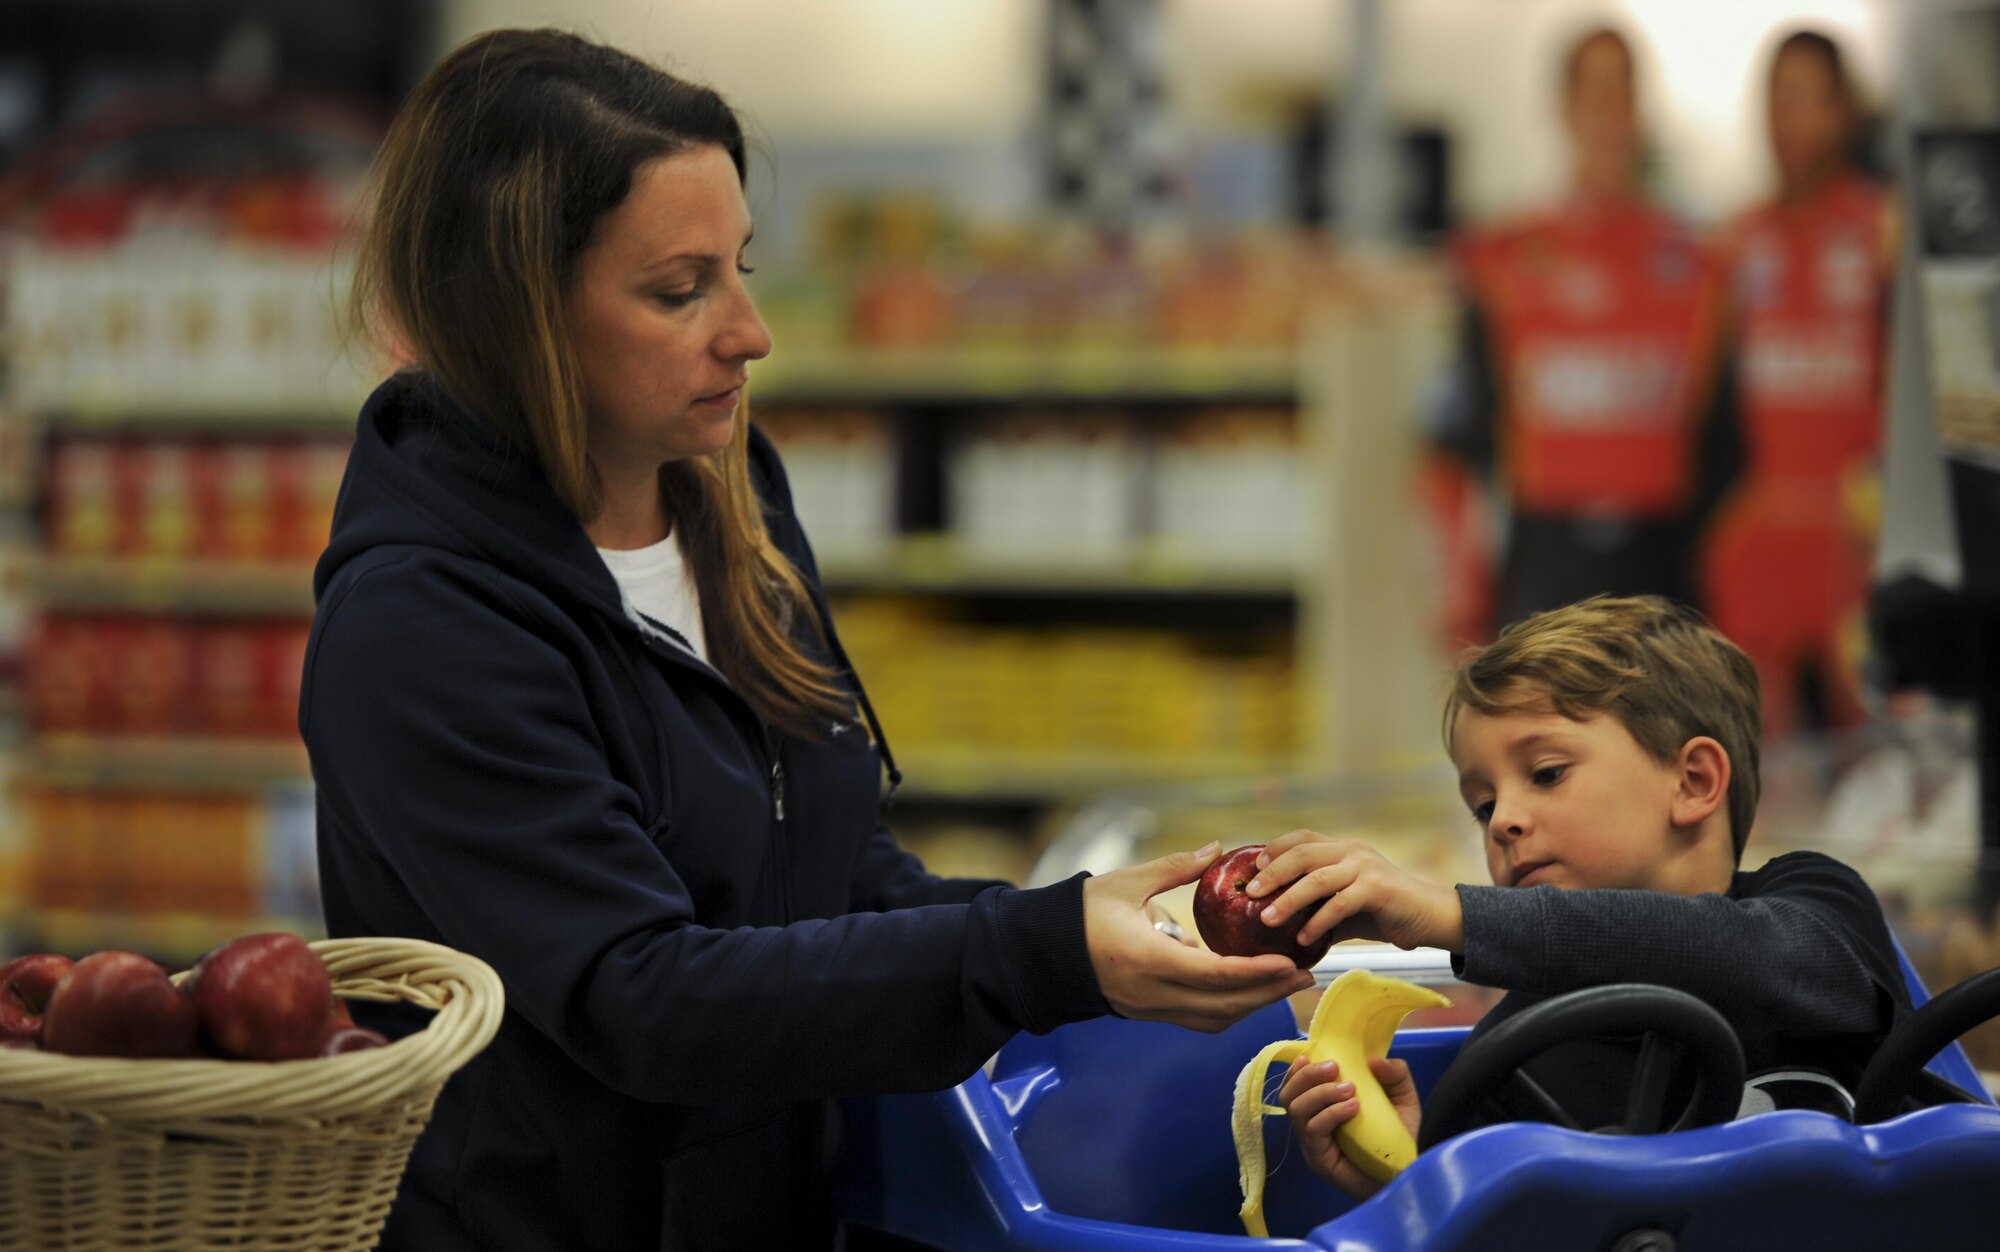 Master Sgt. Jodi Zellers, a contracting officer with the Air Force Test Center at Eglin Air Force Base, hands her son an apple at Hurlburt Field, Fla., Feb. 22, 2017. The Health and Wellness Center staff held an event at the commissary to teach the community habits for a heart-healthy life in recognition of National Heart Health Month. (U.S. Air Force photo by Airman 1st Class Dennis Spain)